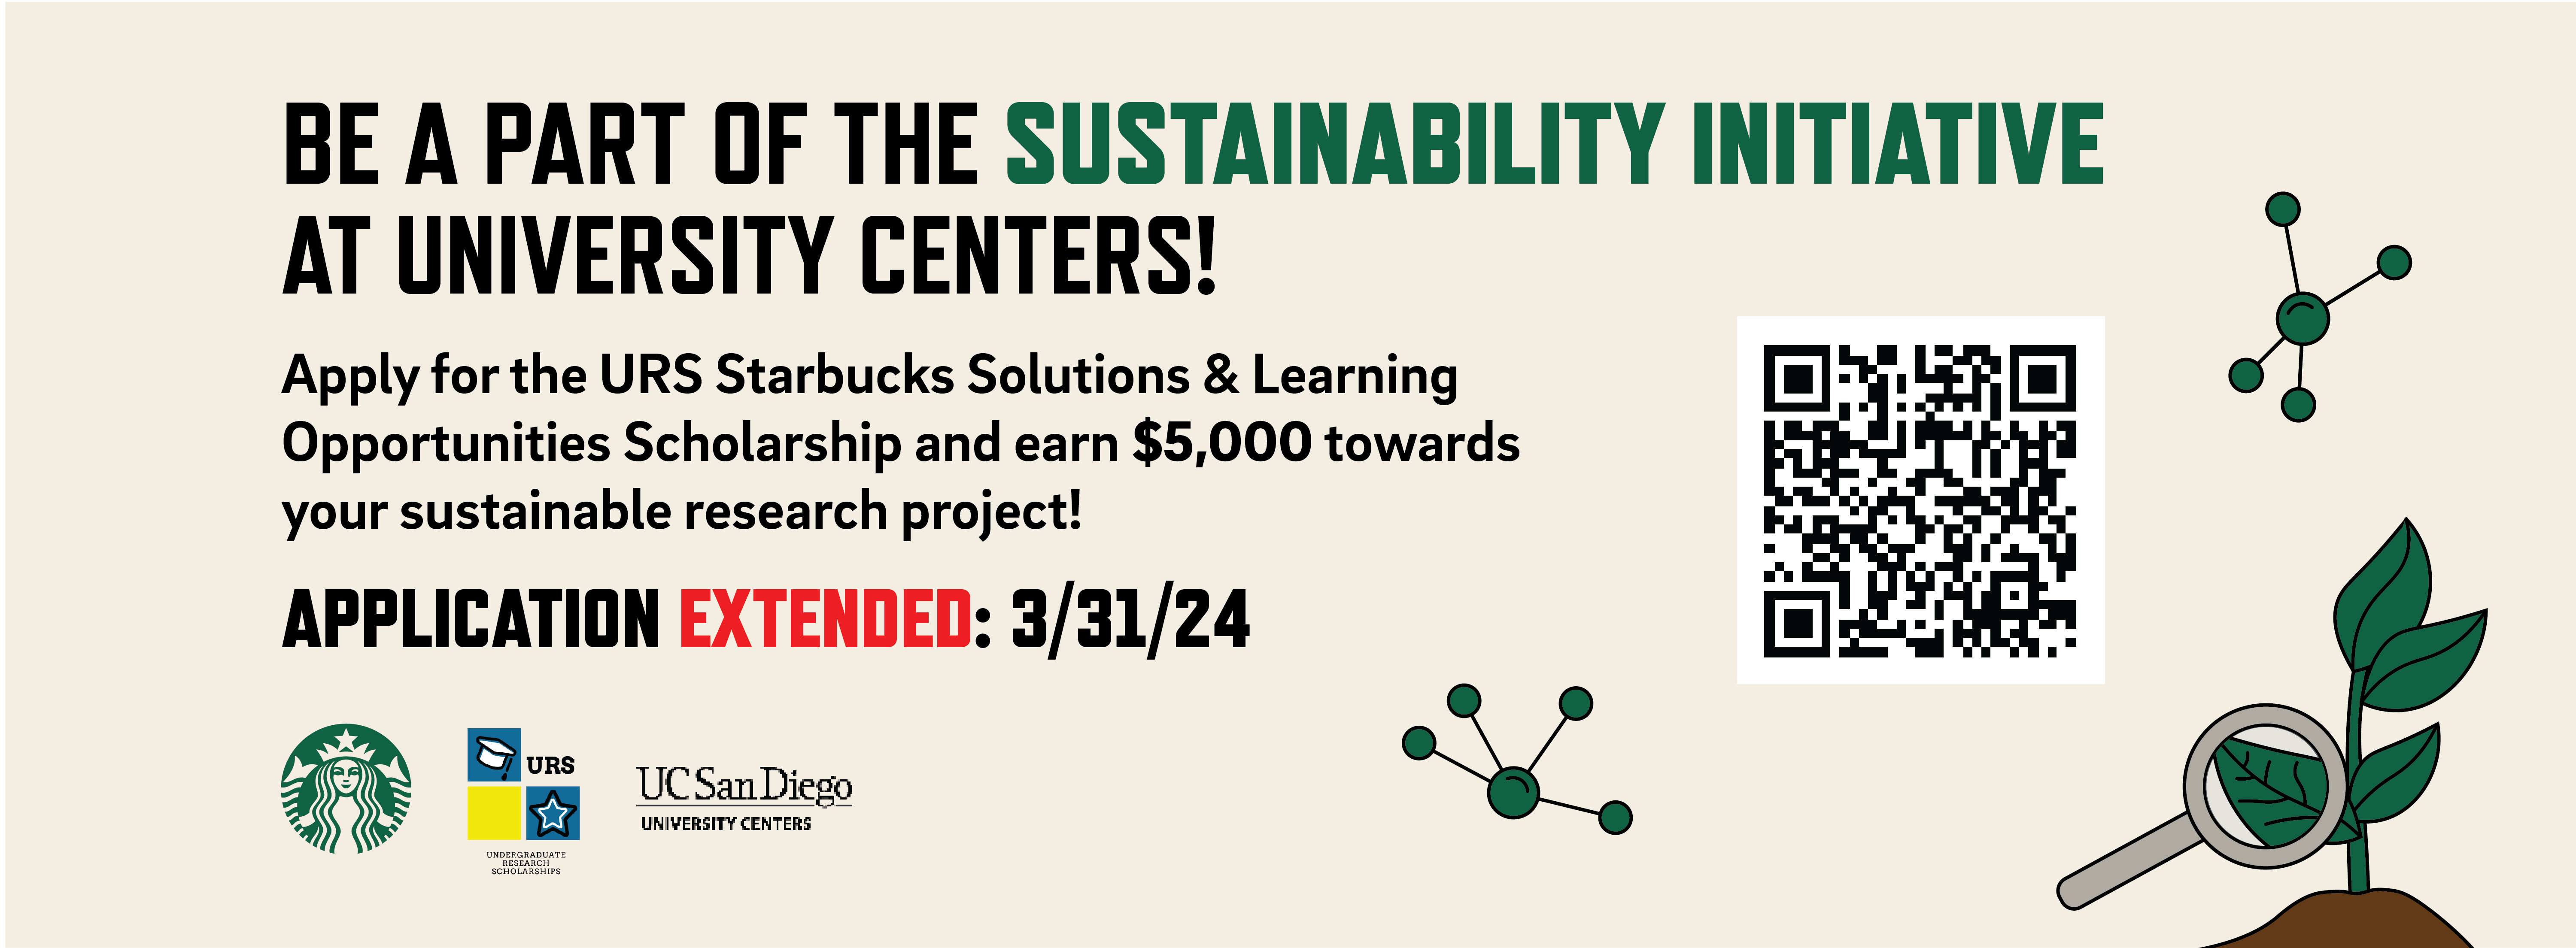 Apply for Starbucks and URS Scholarship to win $5000 towards your sustainable project